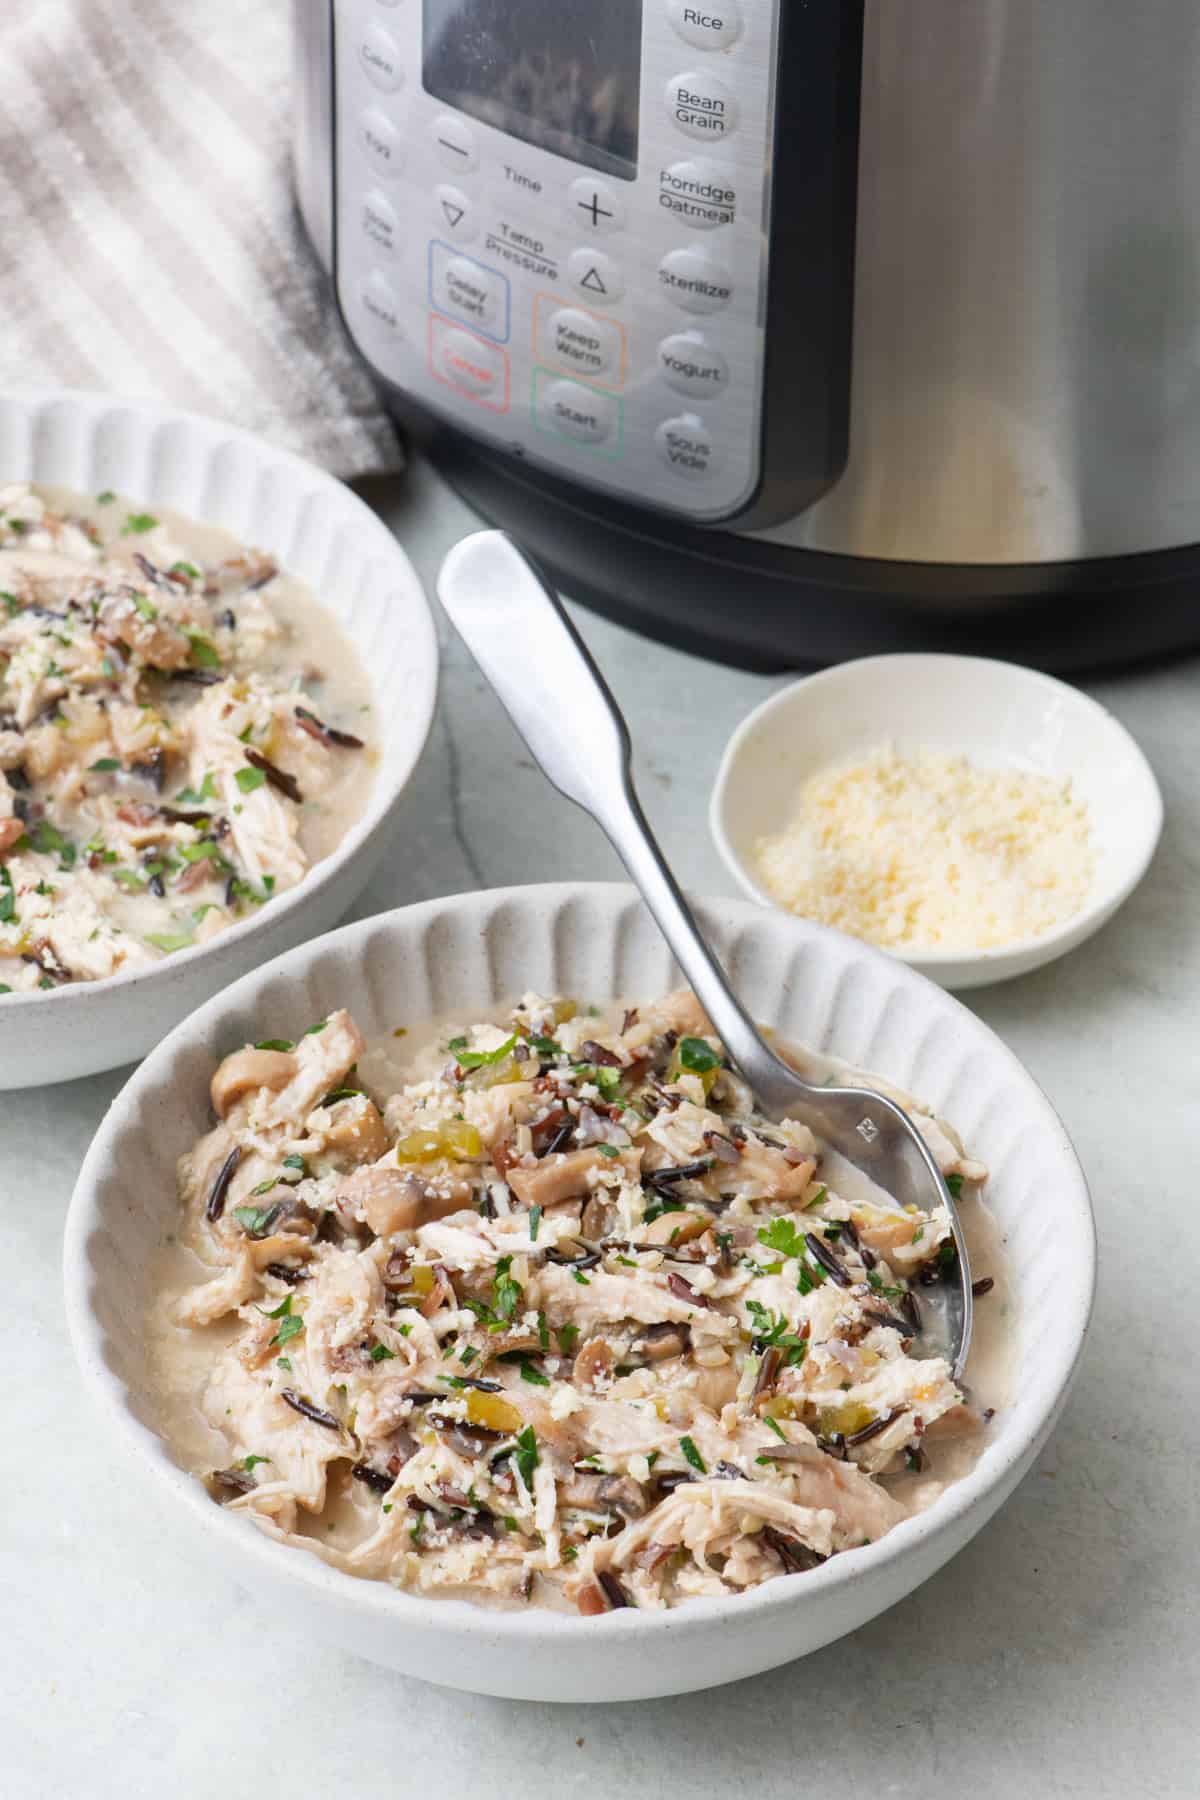 Chicken and rice divided into two bowls with Instant Pot machine nearby.